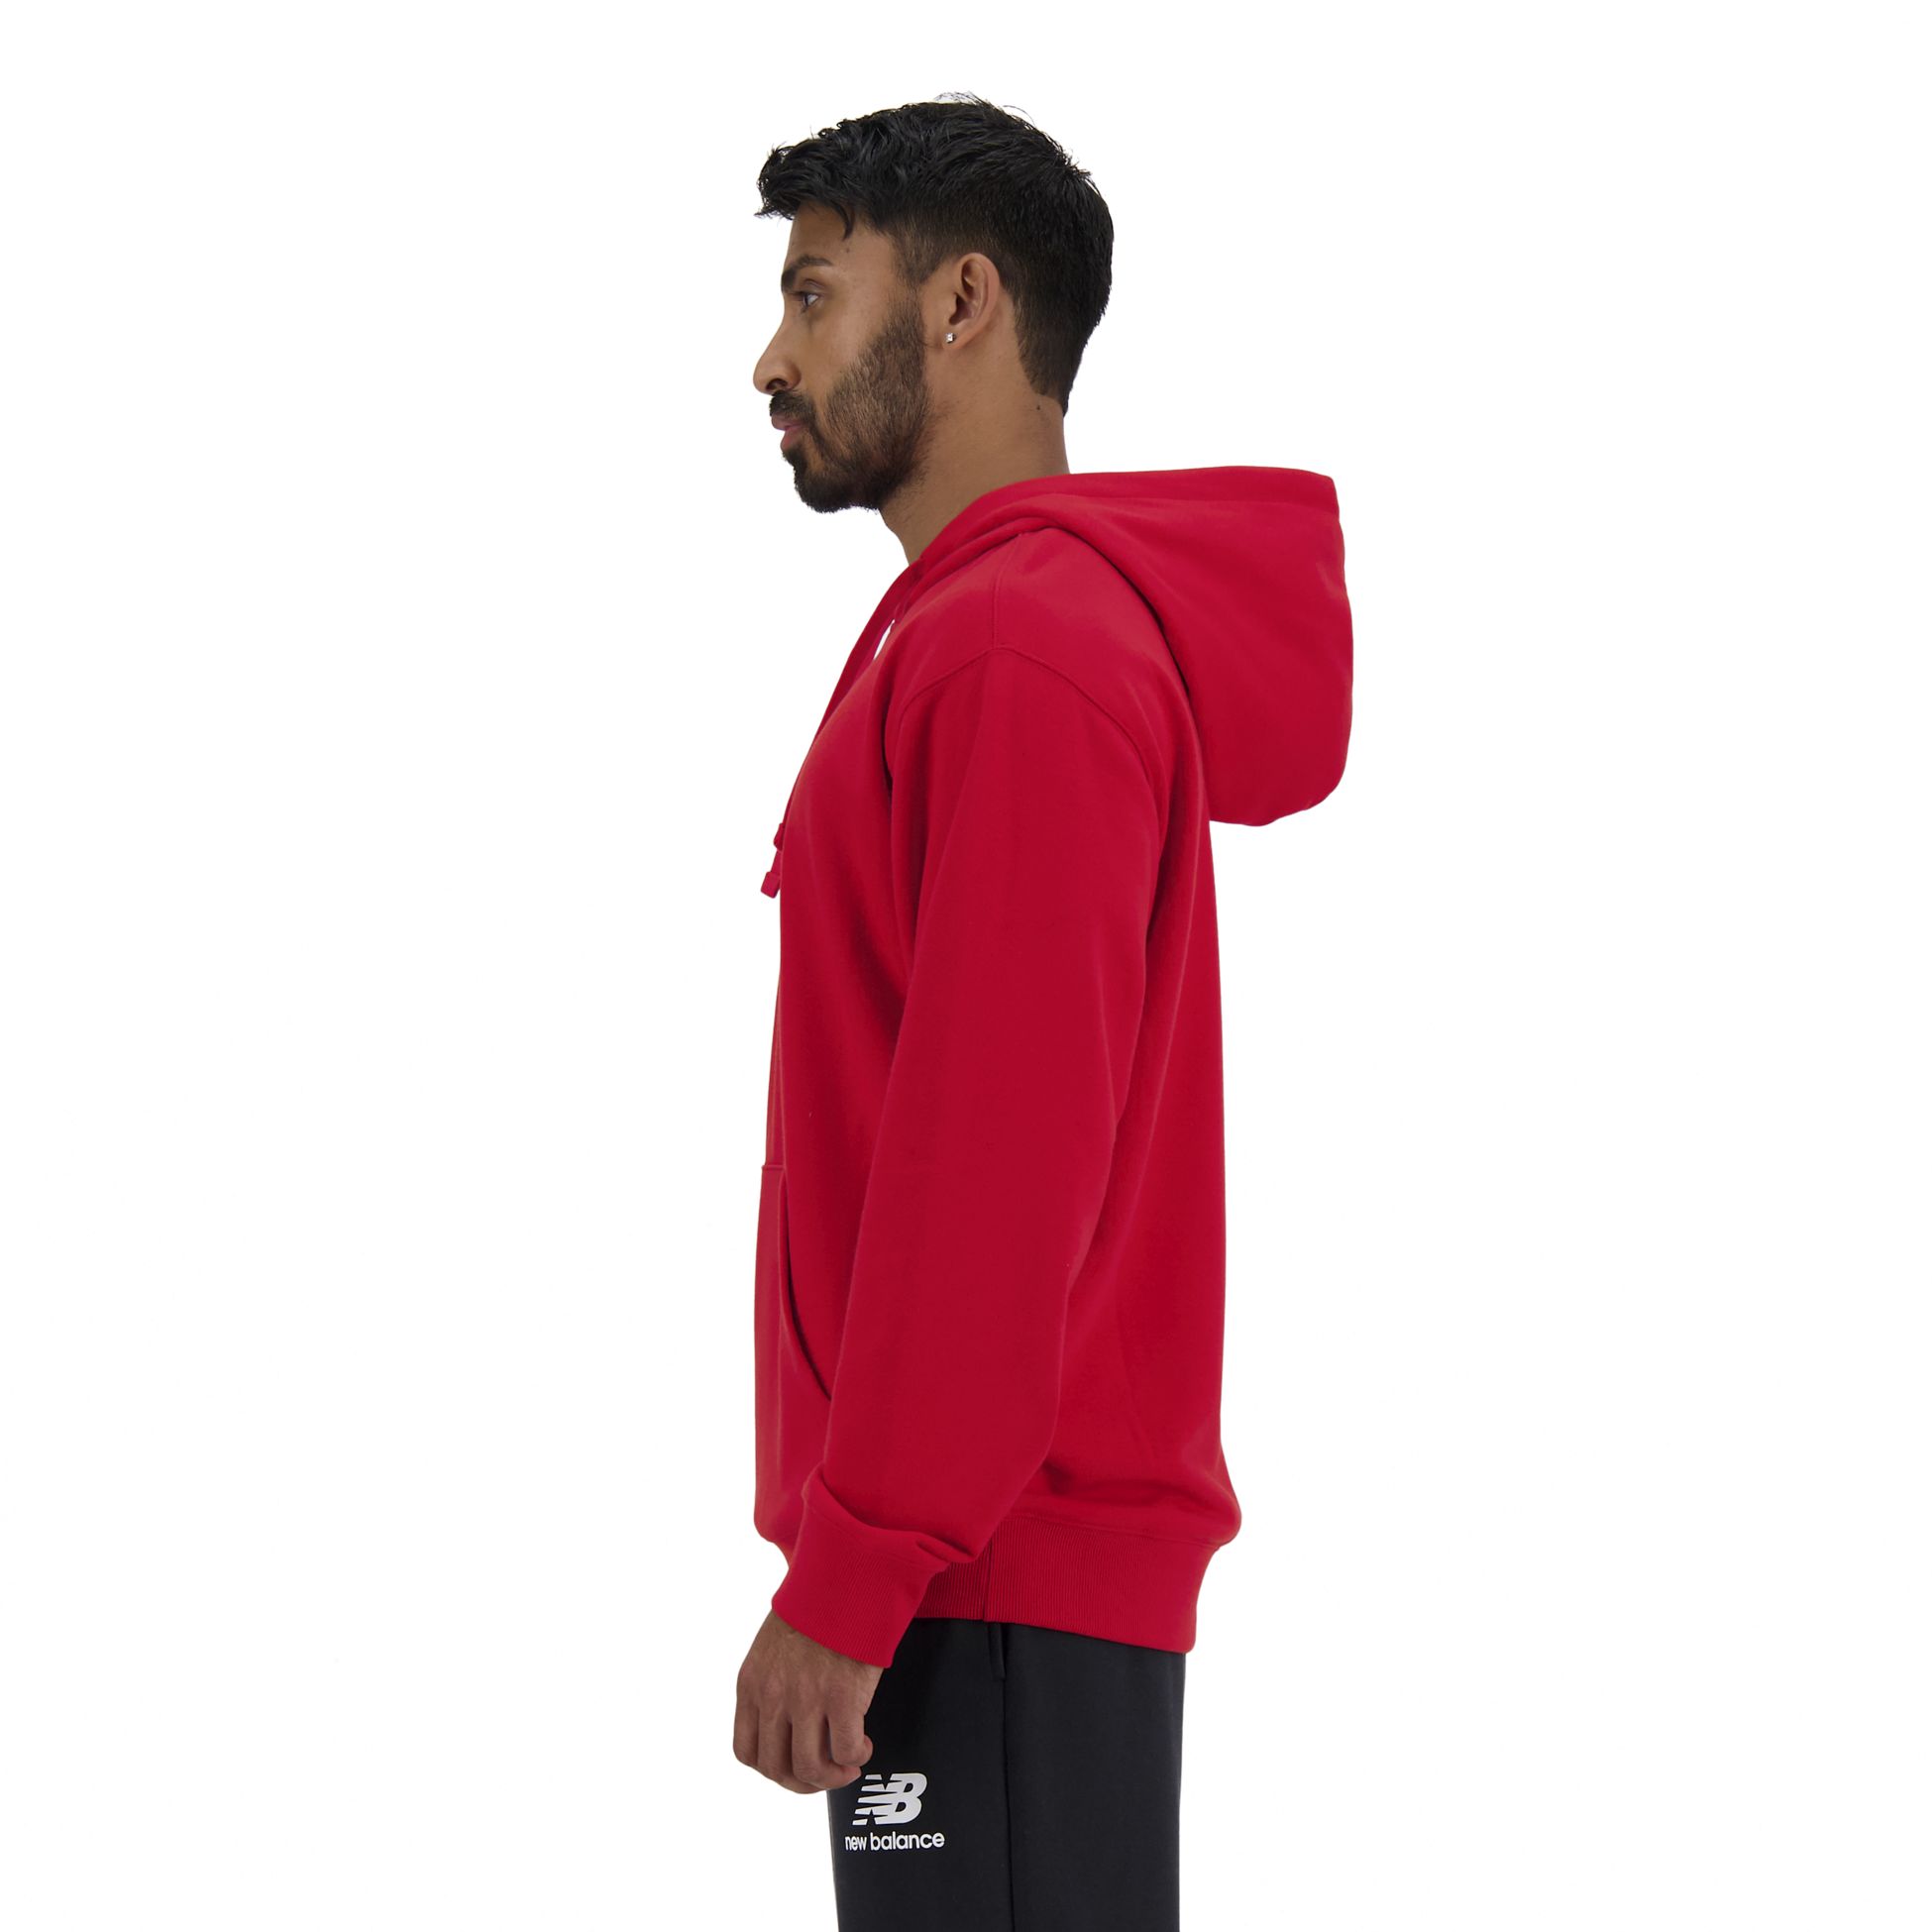 NEW BALANCE, STACKED LOGO FRENCH TERRY HOODIE